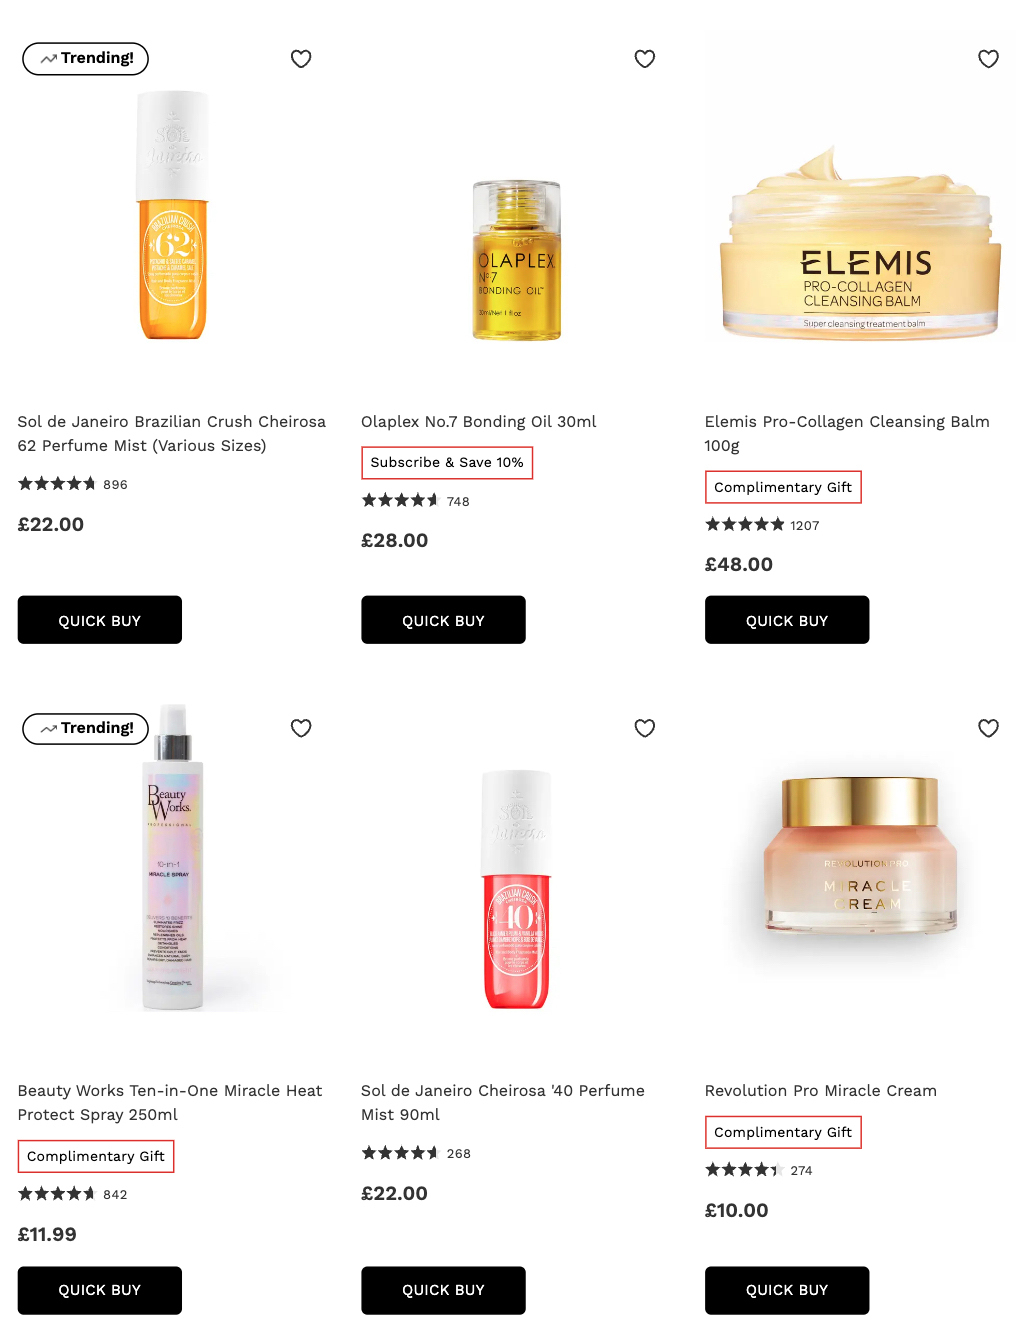 25% off selected Anastasia Beverly Hills, Sol De Janeiro, Elemis, By Terry, Caudalie, Drunk Elephant, Kiehl's, Living Proof, Murad, and more at Lookfantastic